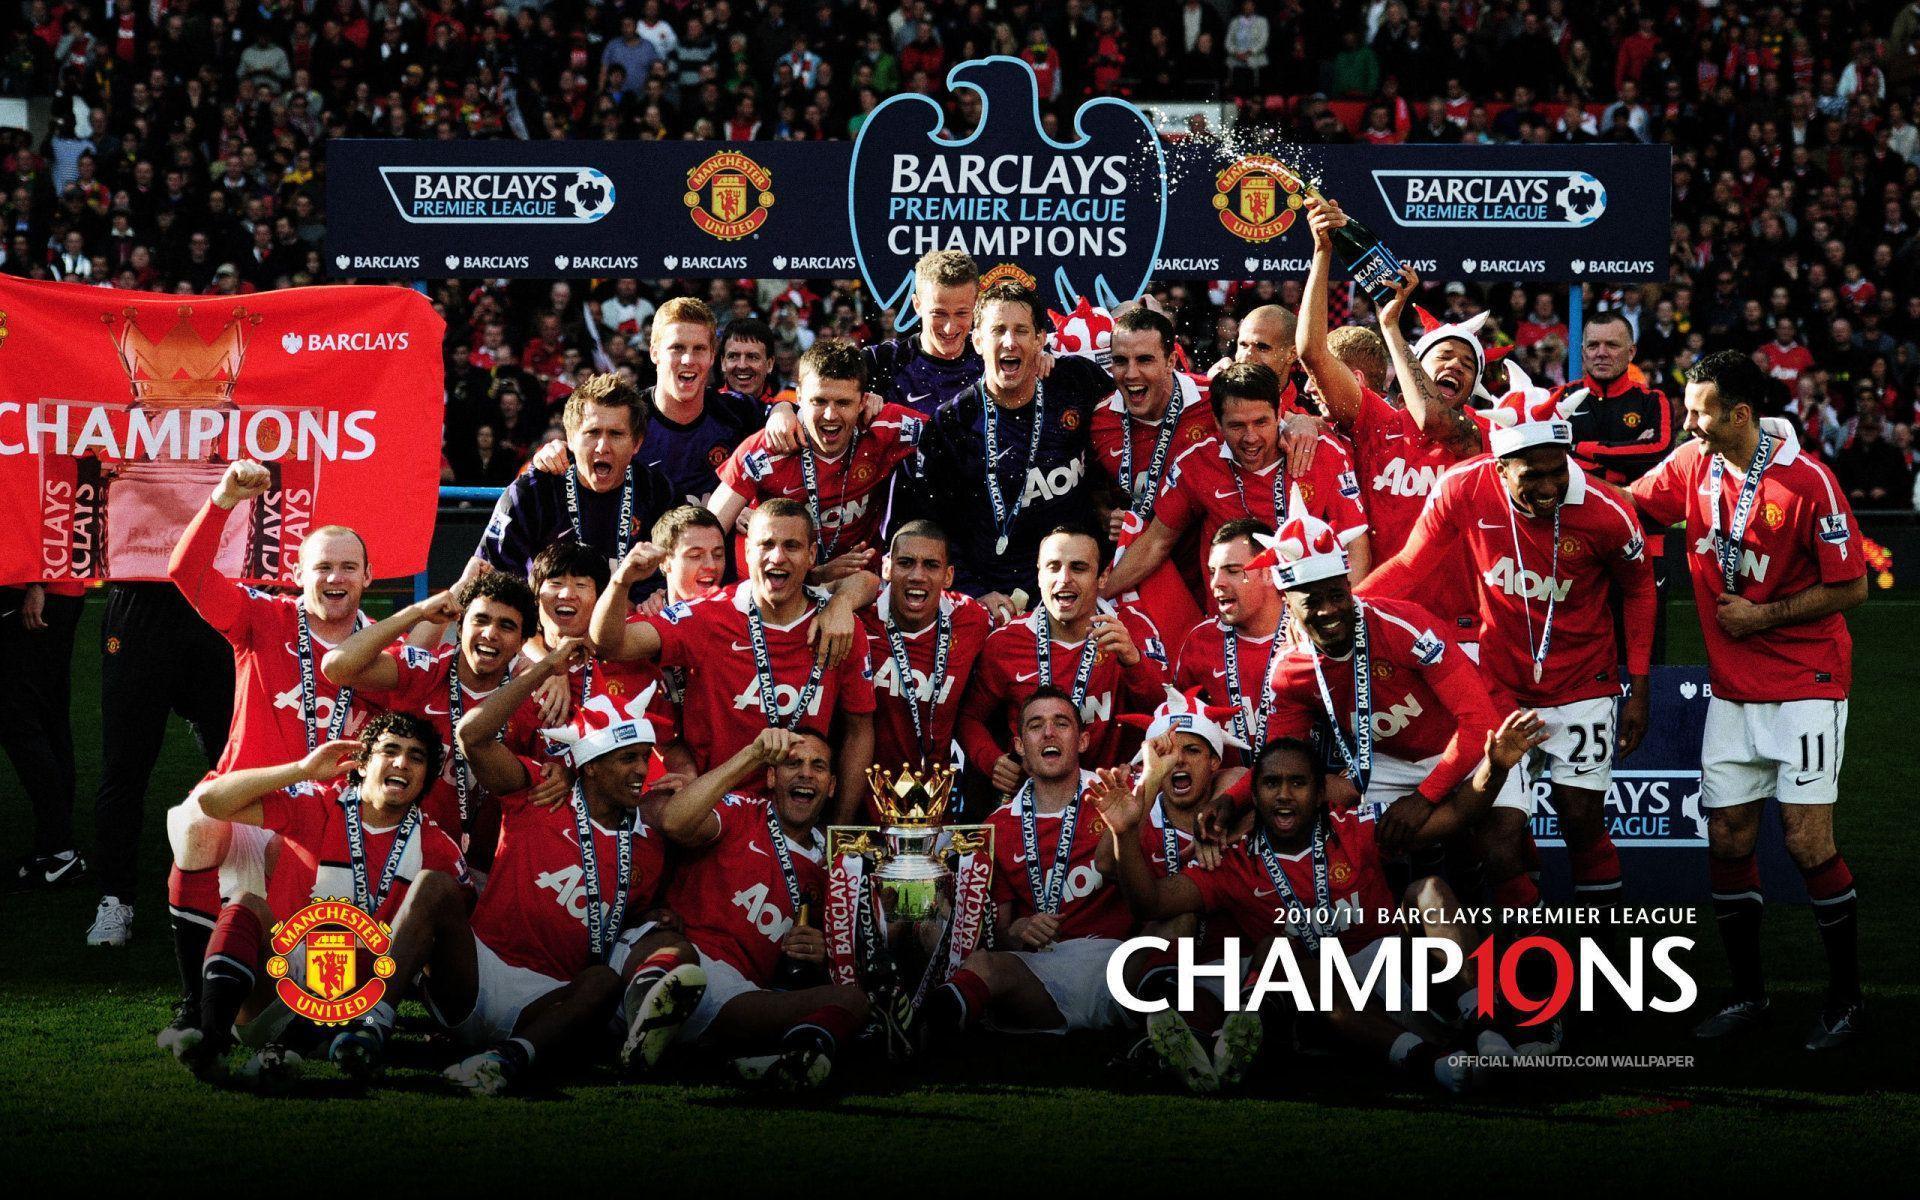 Manchester United Players Wallpaper Download - Manchester United